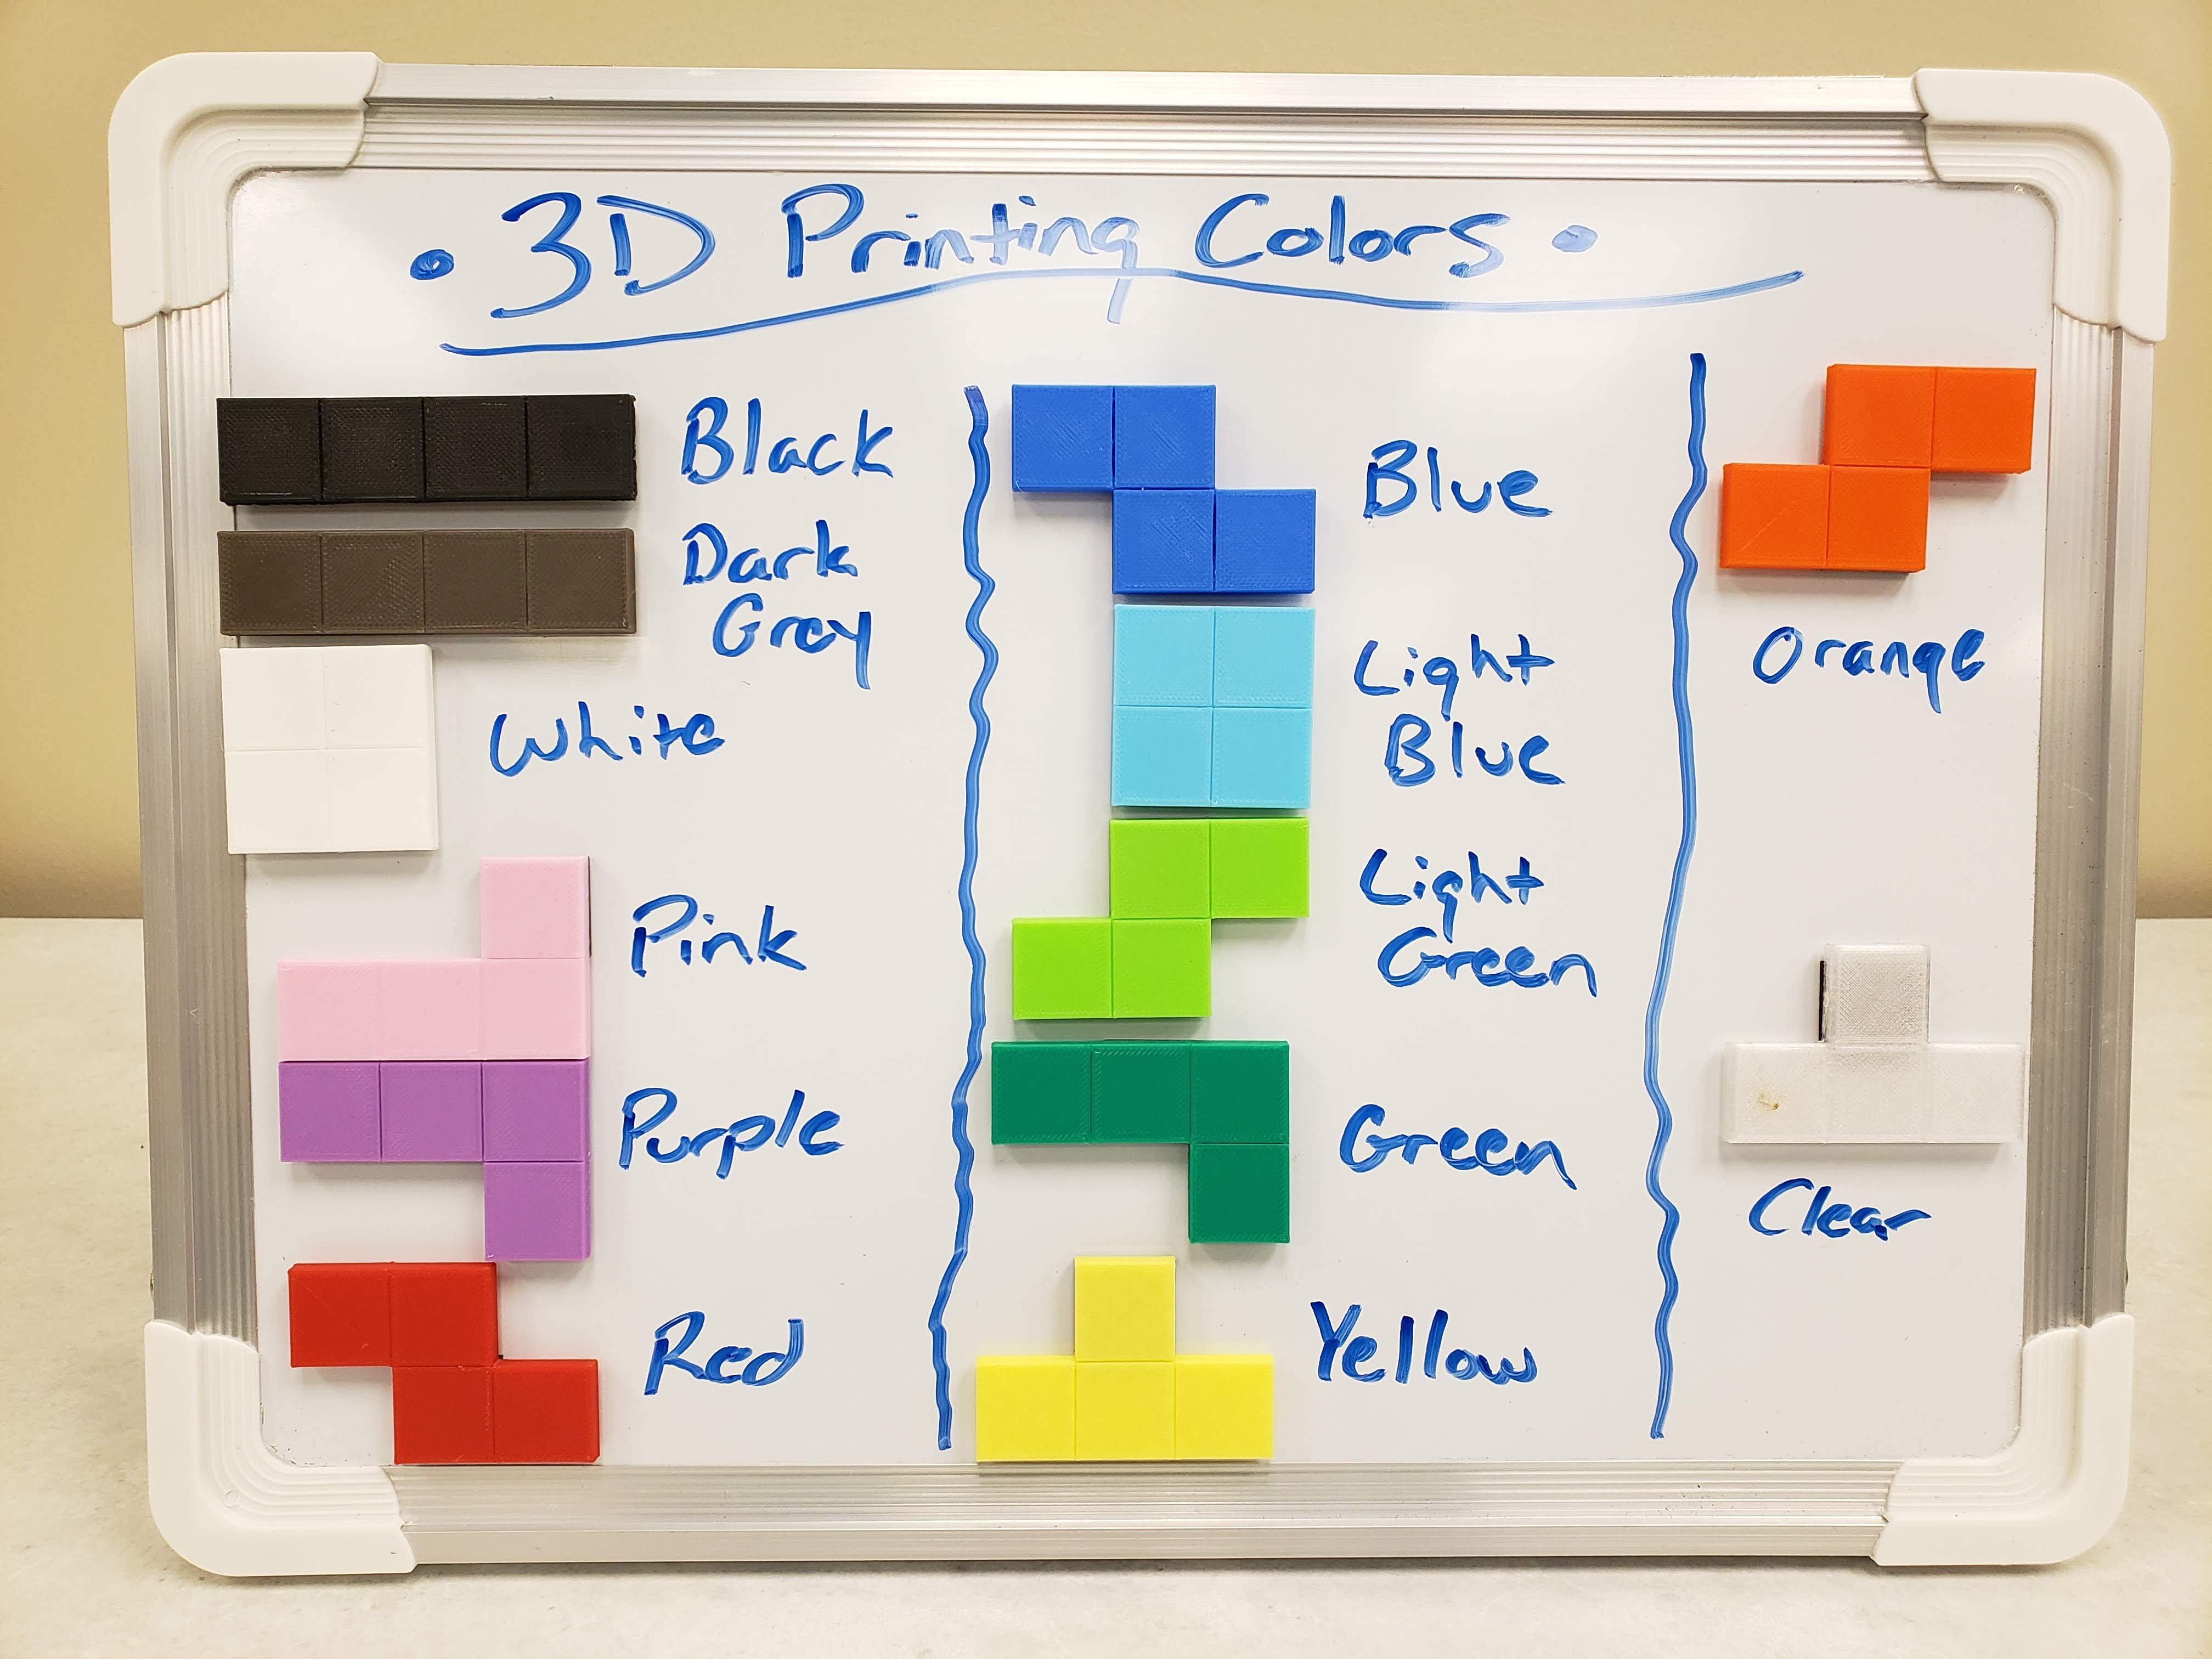 3D printed Tetris pieces showing the different colors and qualities of filament